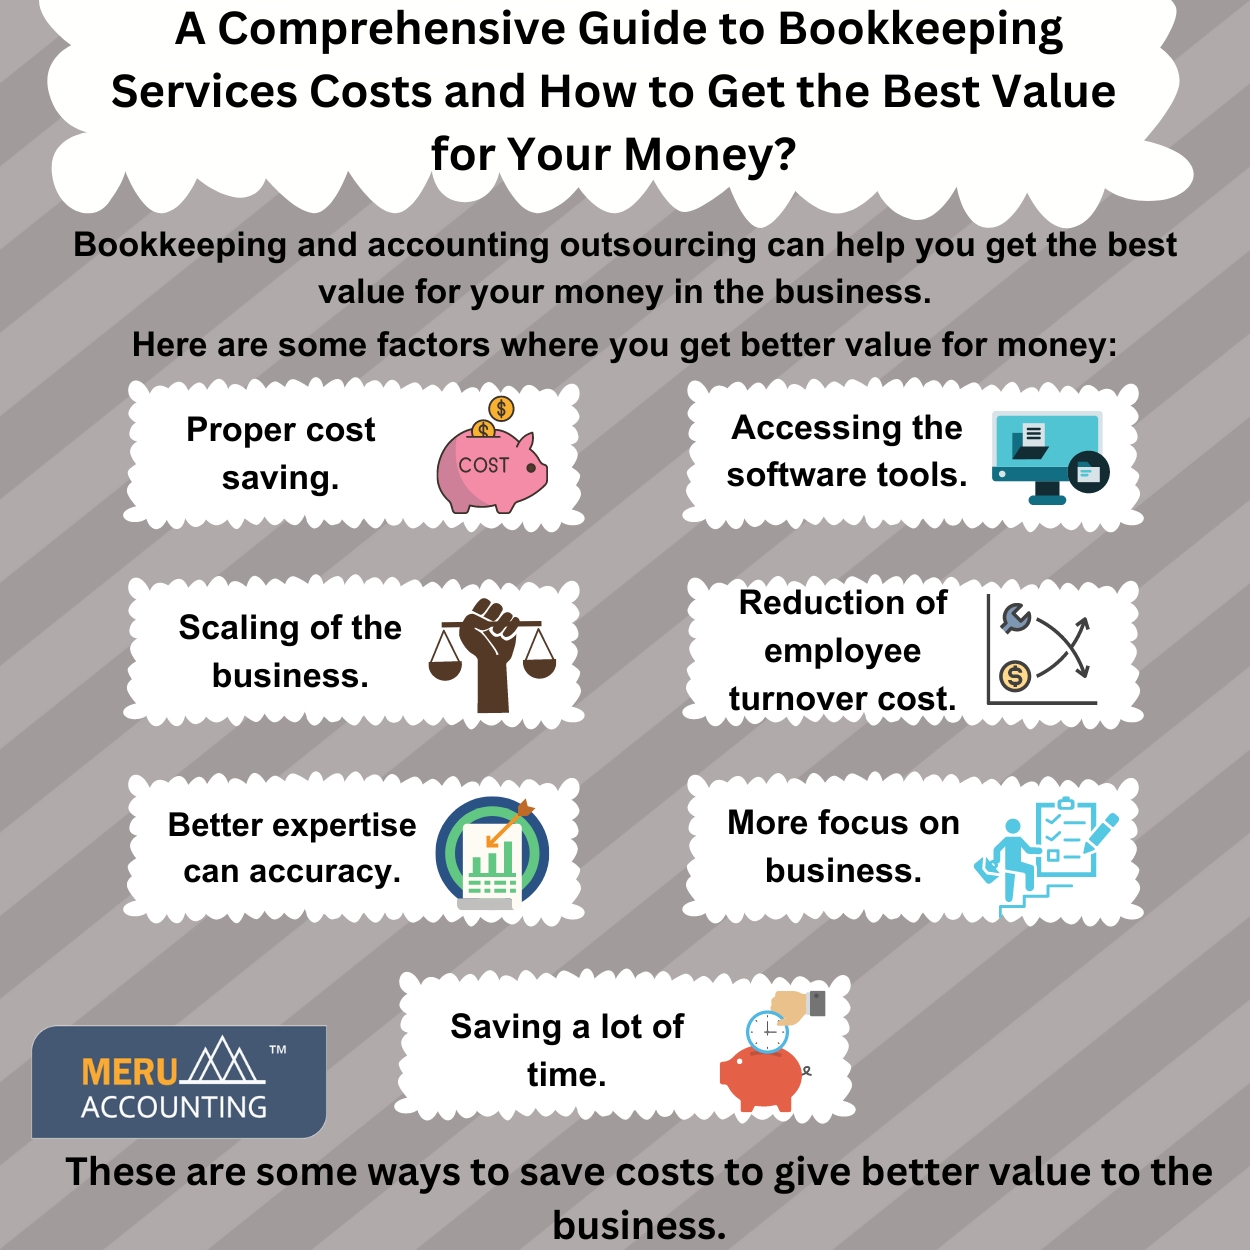 A Comprehensive Guide to Bookkeeping Services Costs and How to Get the Best Value for Your Money 1250 by 1250